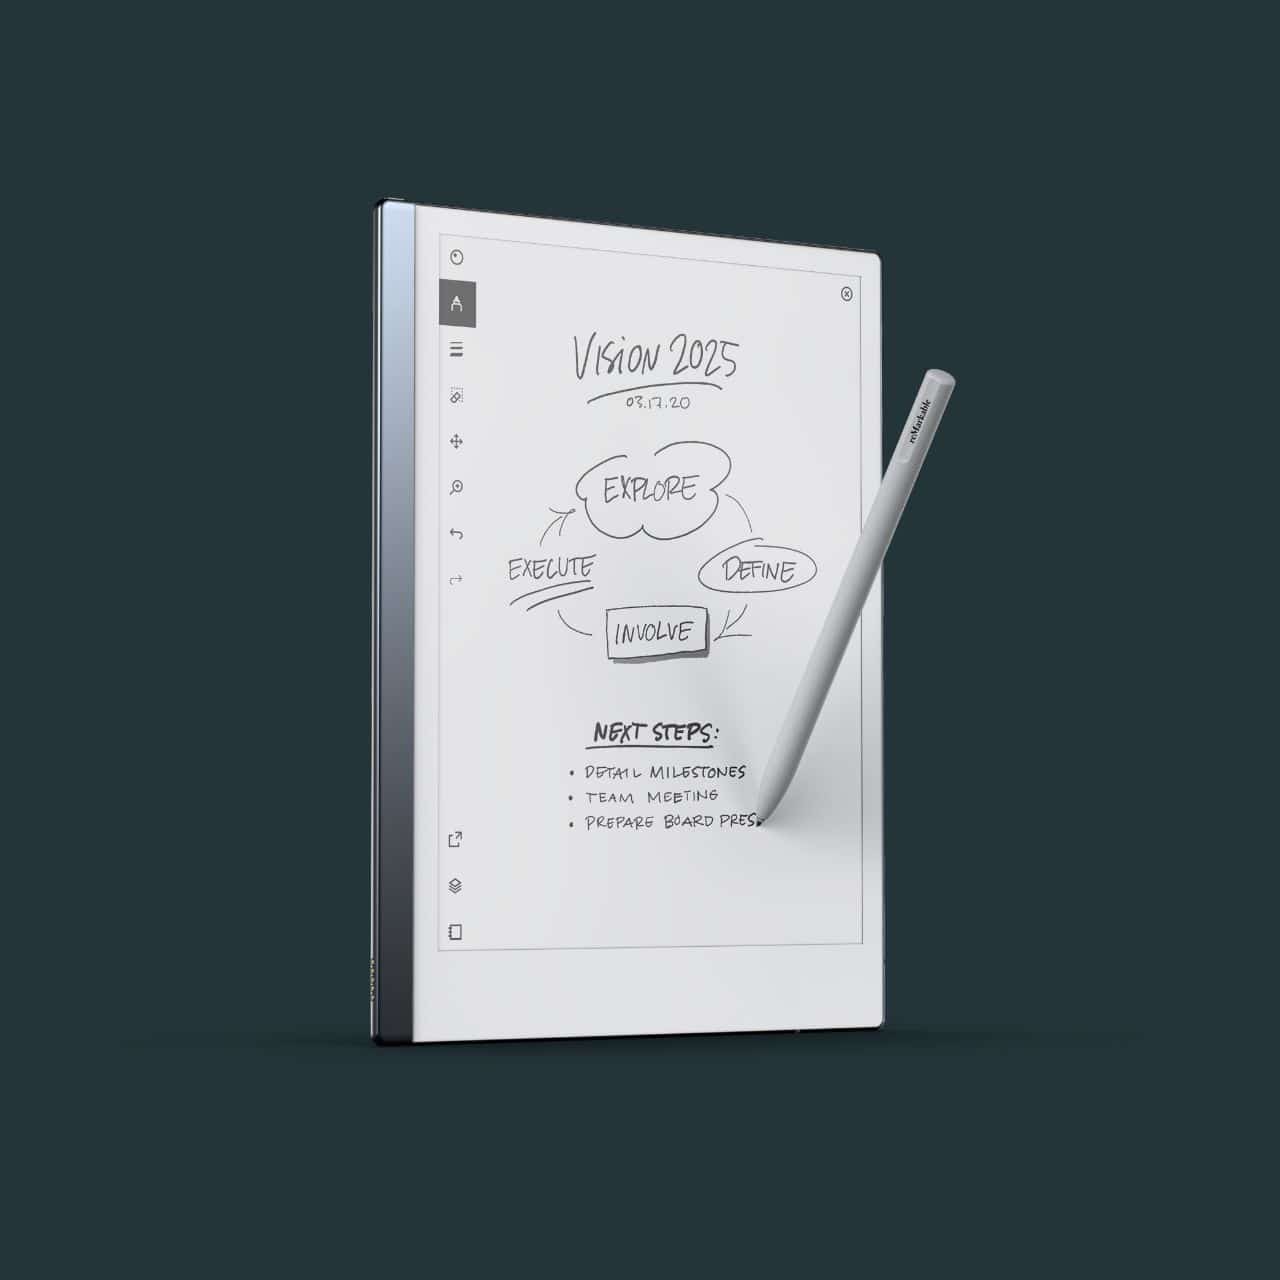 reMarkable 2 paper tablet launched in India: Price, availability and more